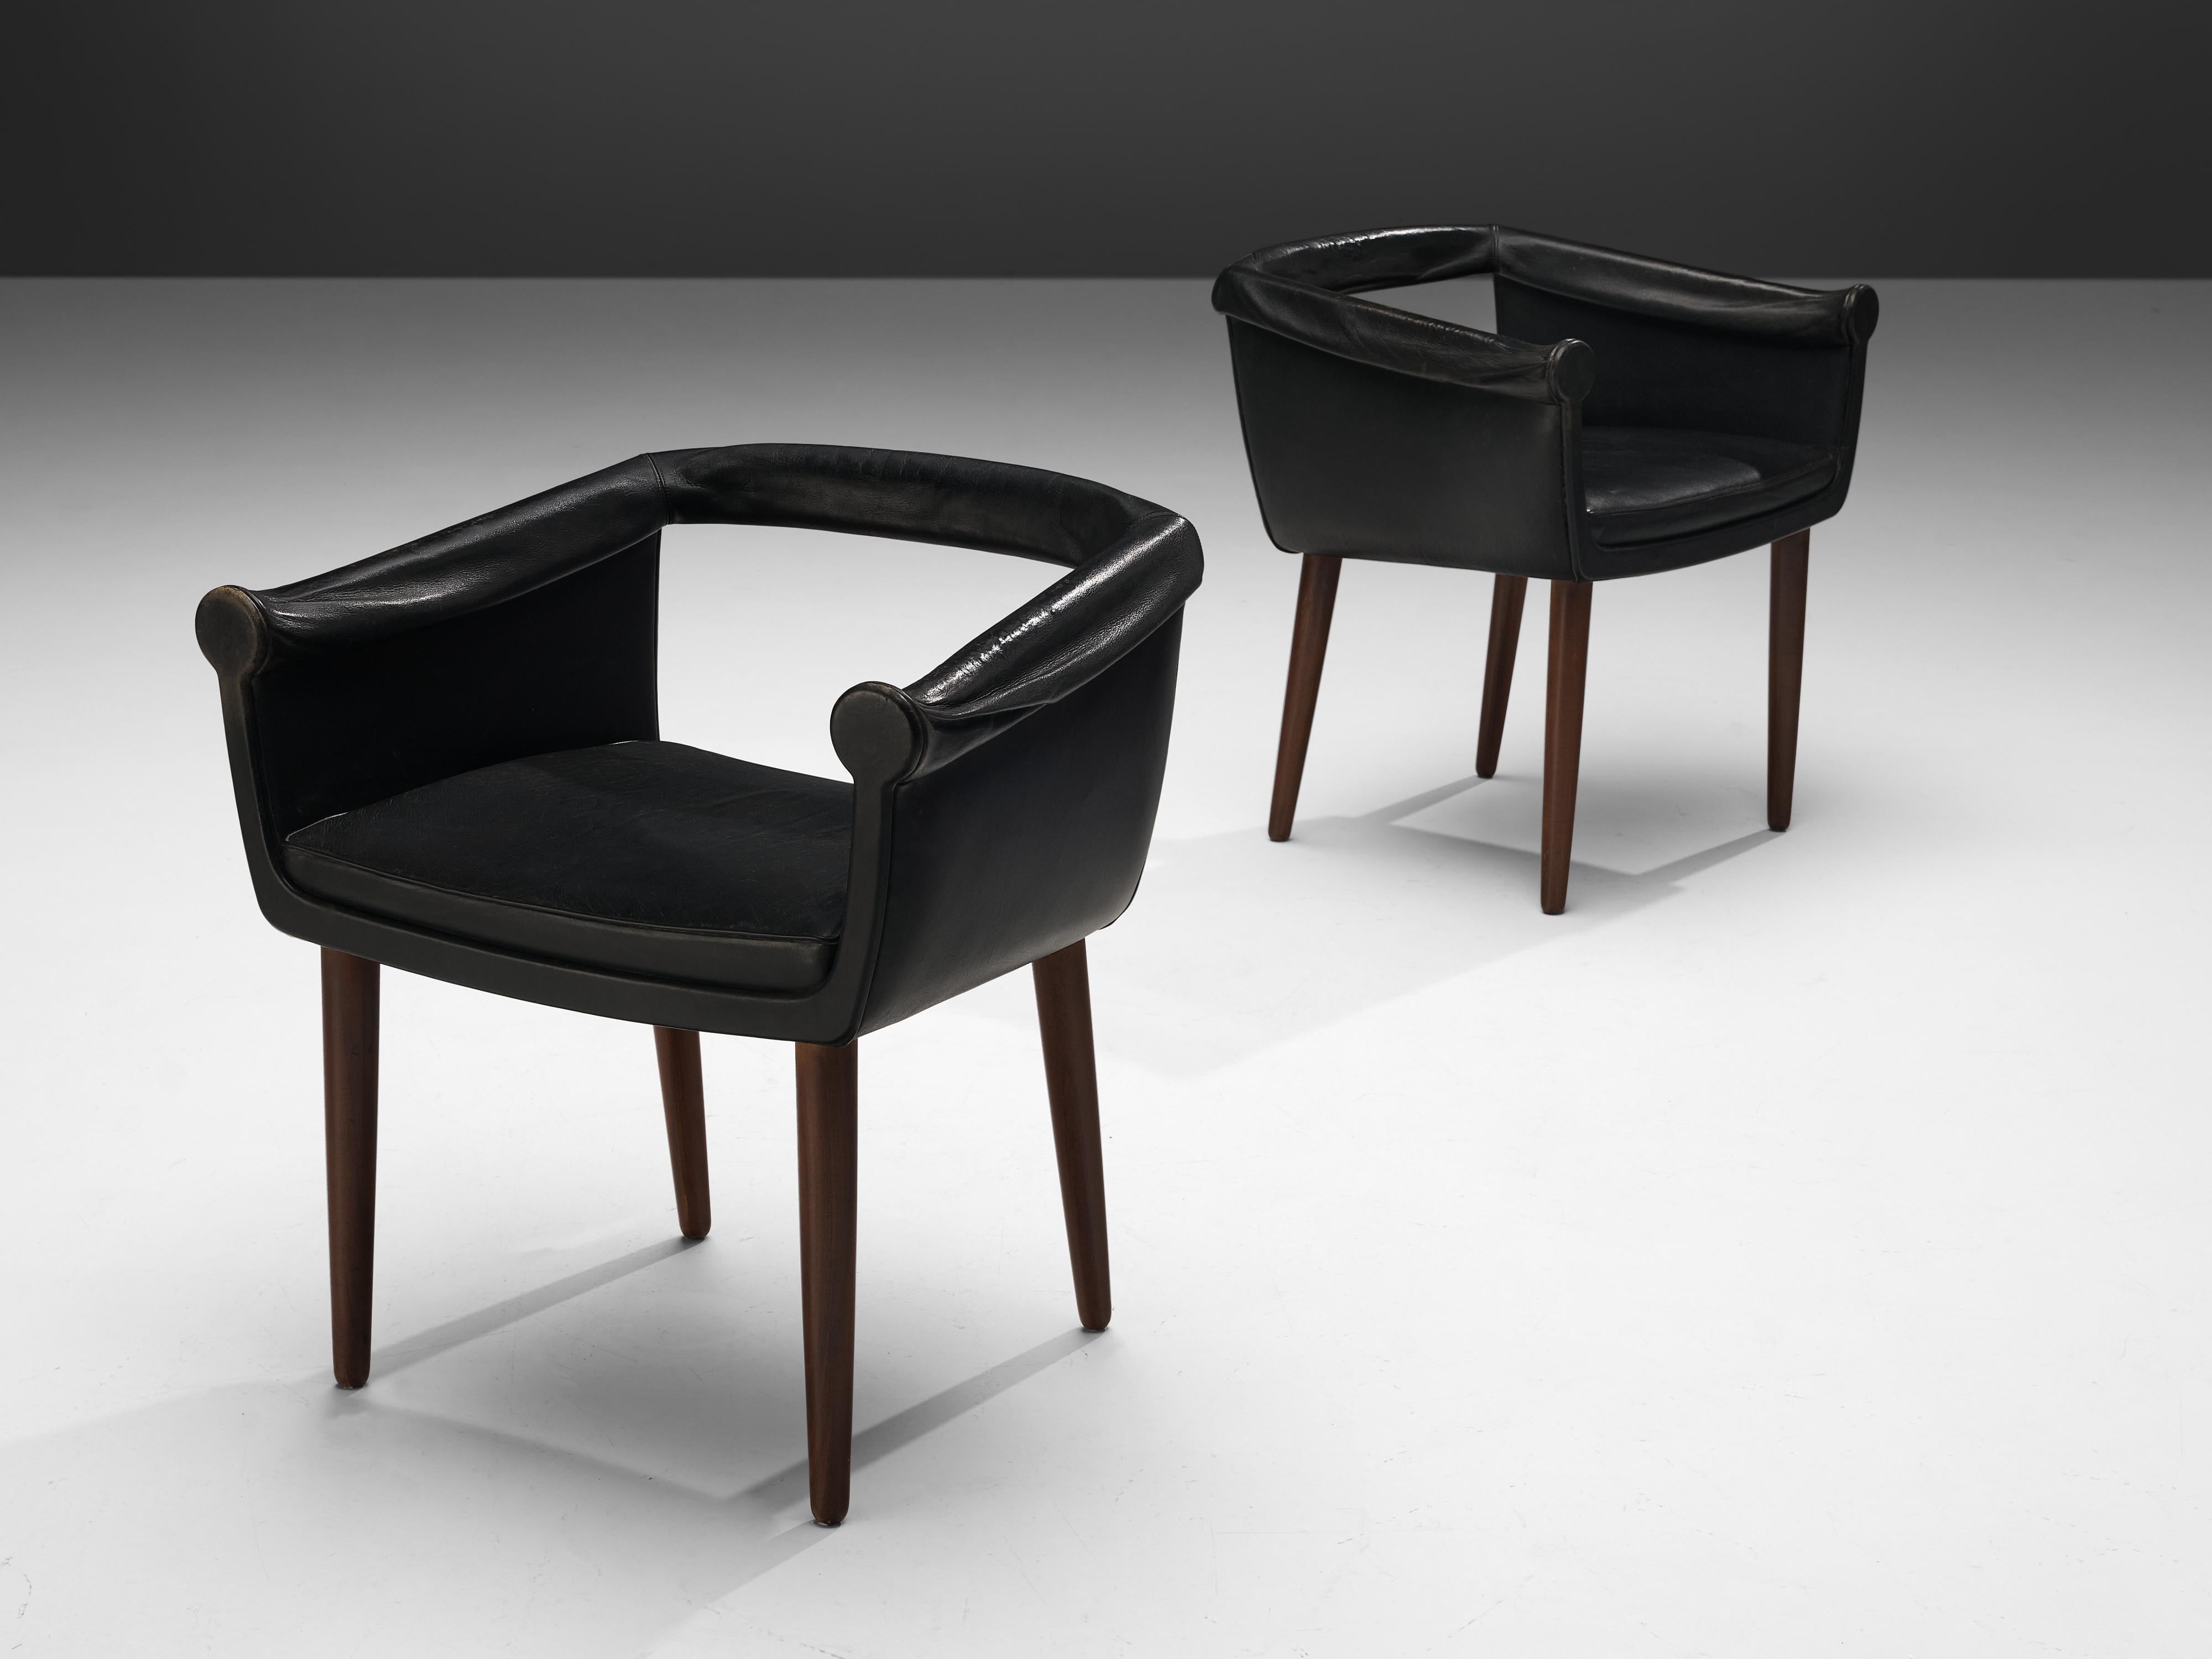 Poul Jessen for Viby, pair of armchairs, black leather, wood, Denmark, 1960s

Wonderful pair of armchairs in patinated black leather. Characteristic about this design by Poul Jessen are the circular armrests that connect with the backrest that